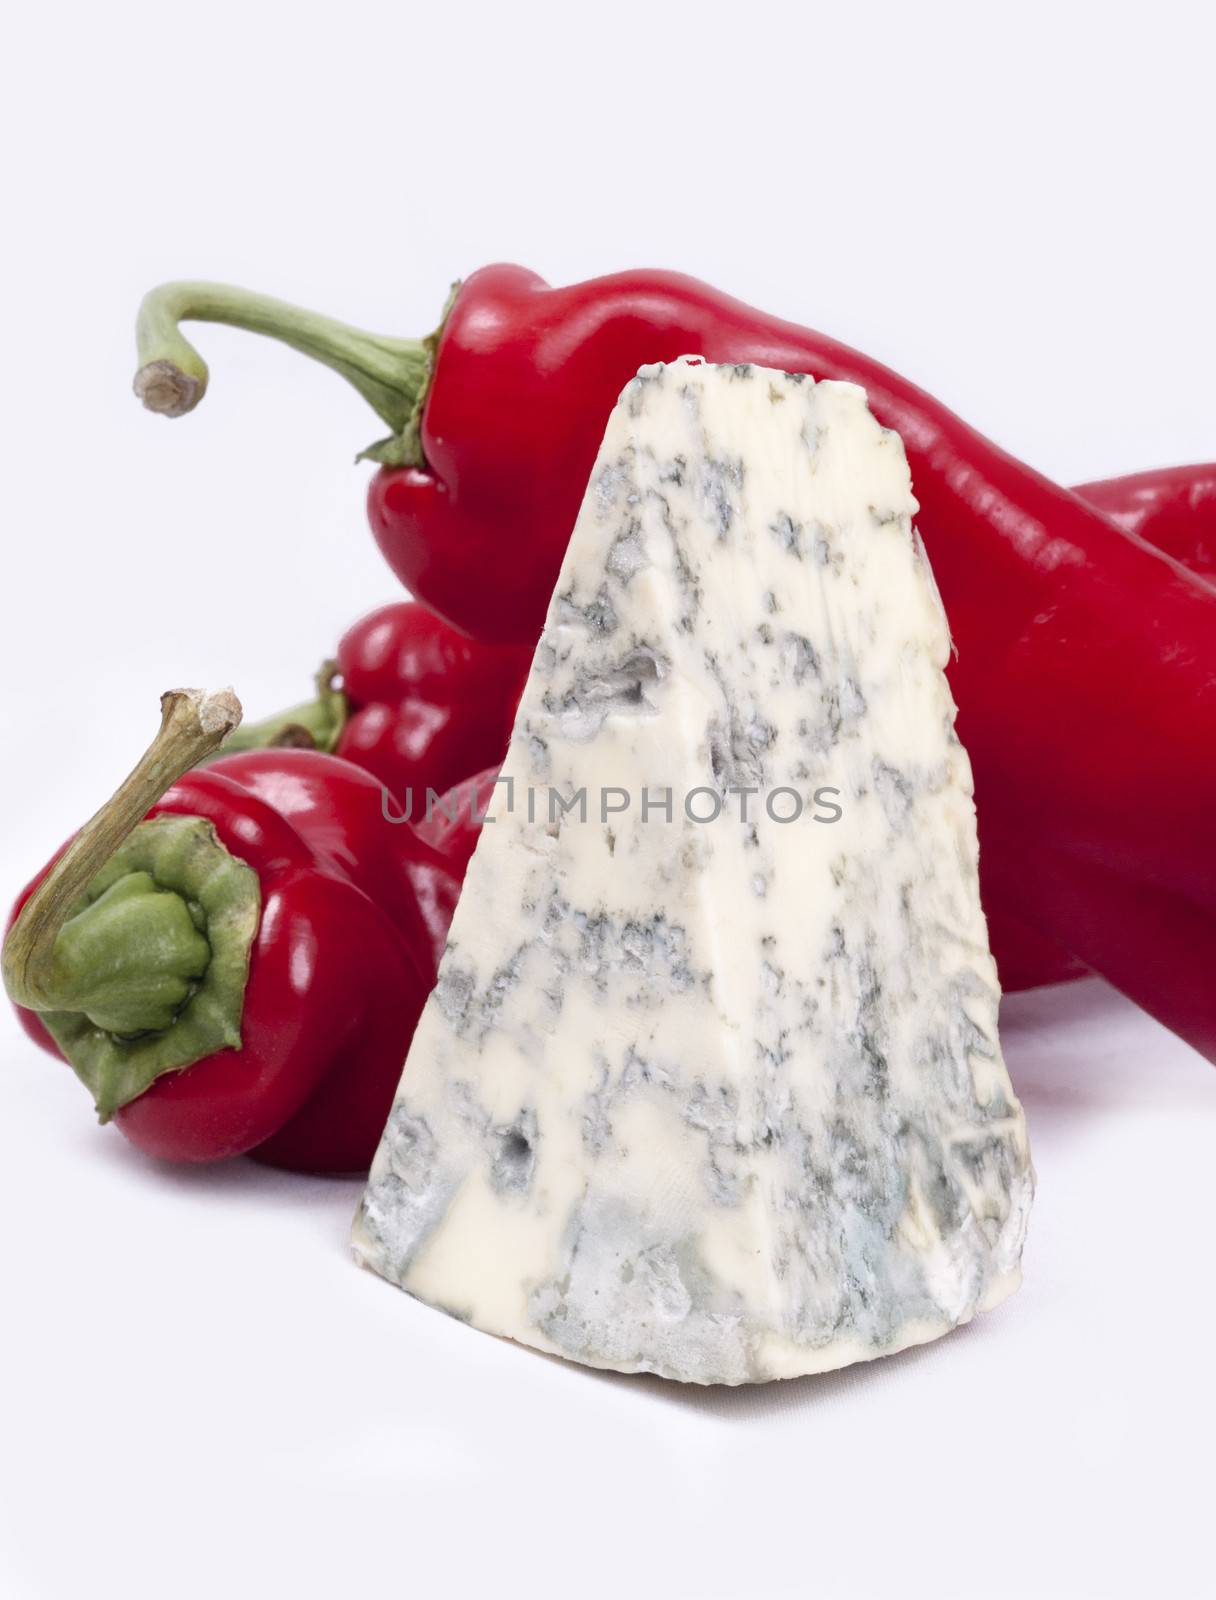 Mold cheese and red pepper  by Alenmax